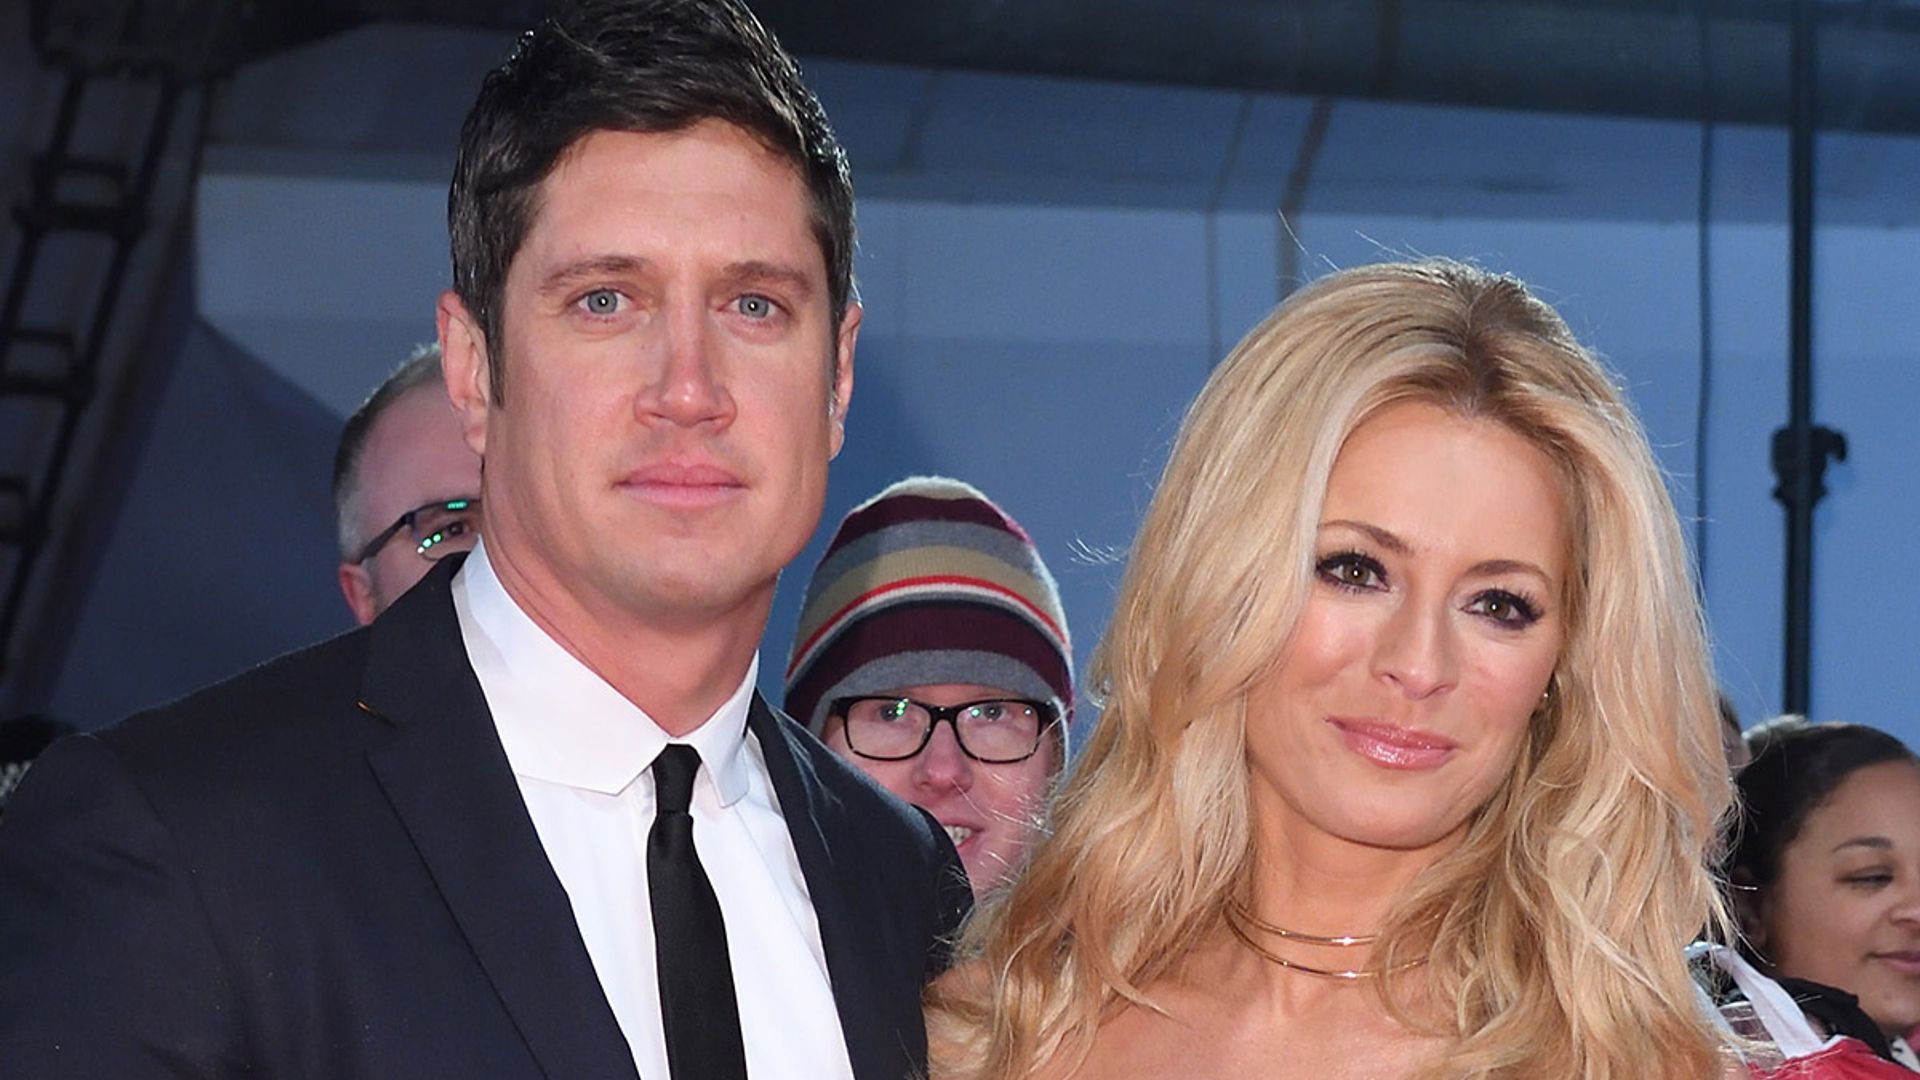 tess-daly-and-vernon-kay-red-carpet-